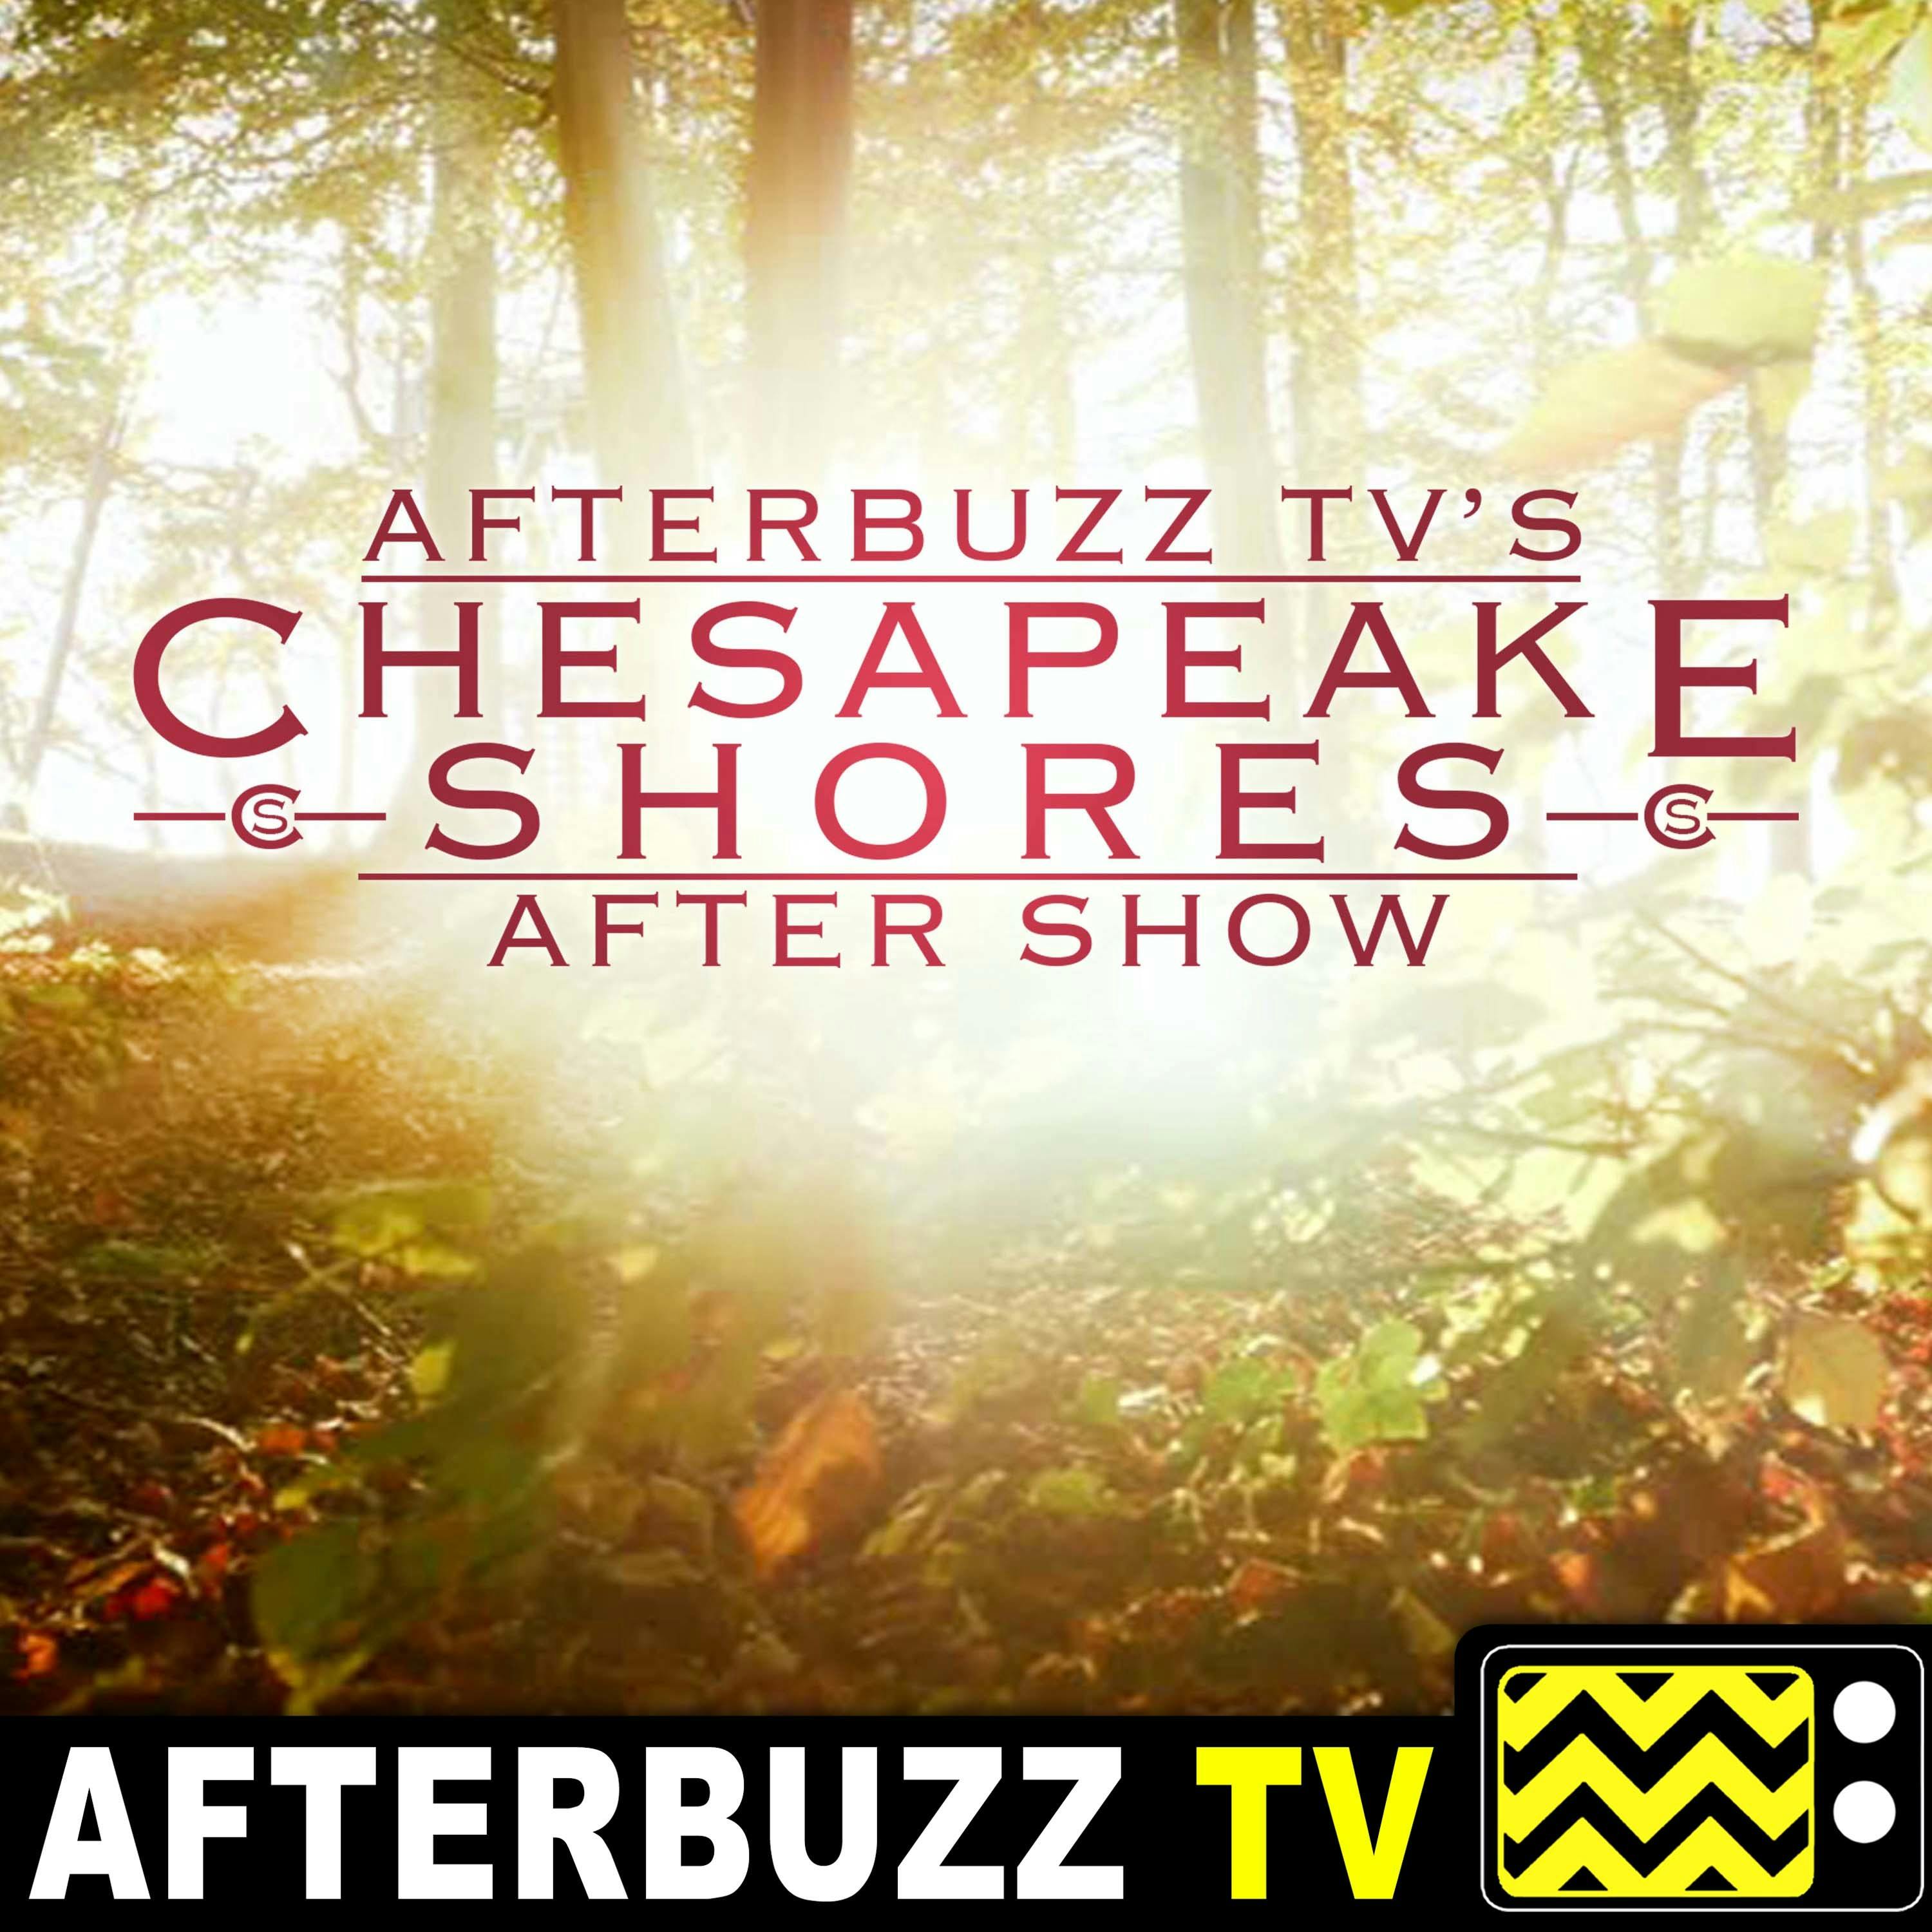 Chesapeake Shores S:1 | John Tinker Guests on Exes Mark The Spot E:9 | AfterBuzz TV AfterShow